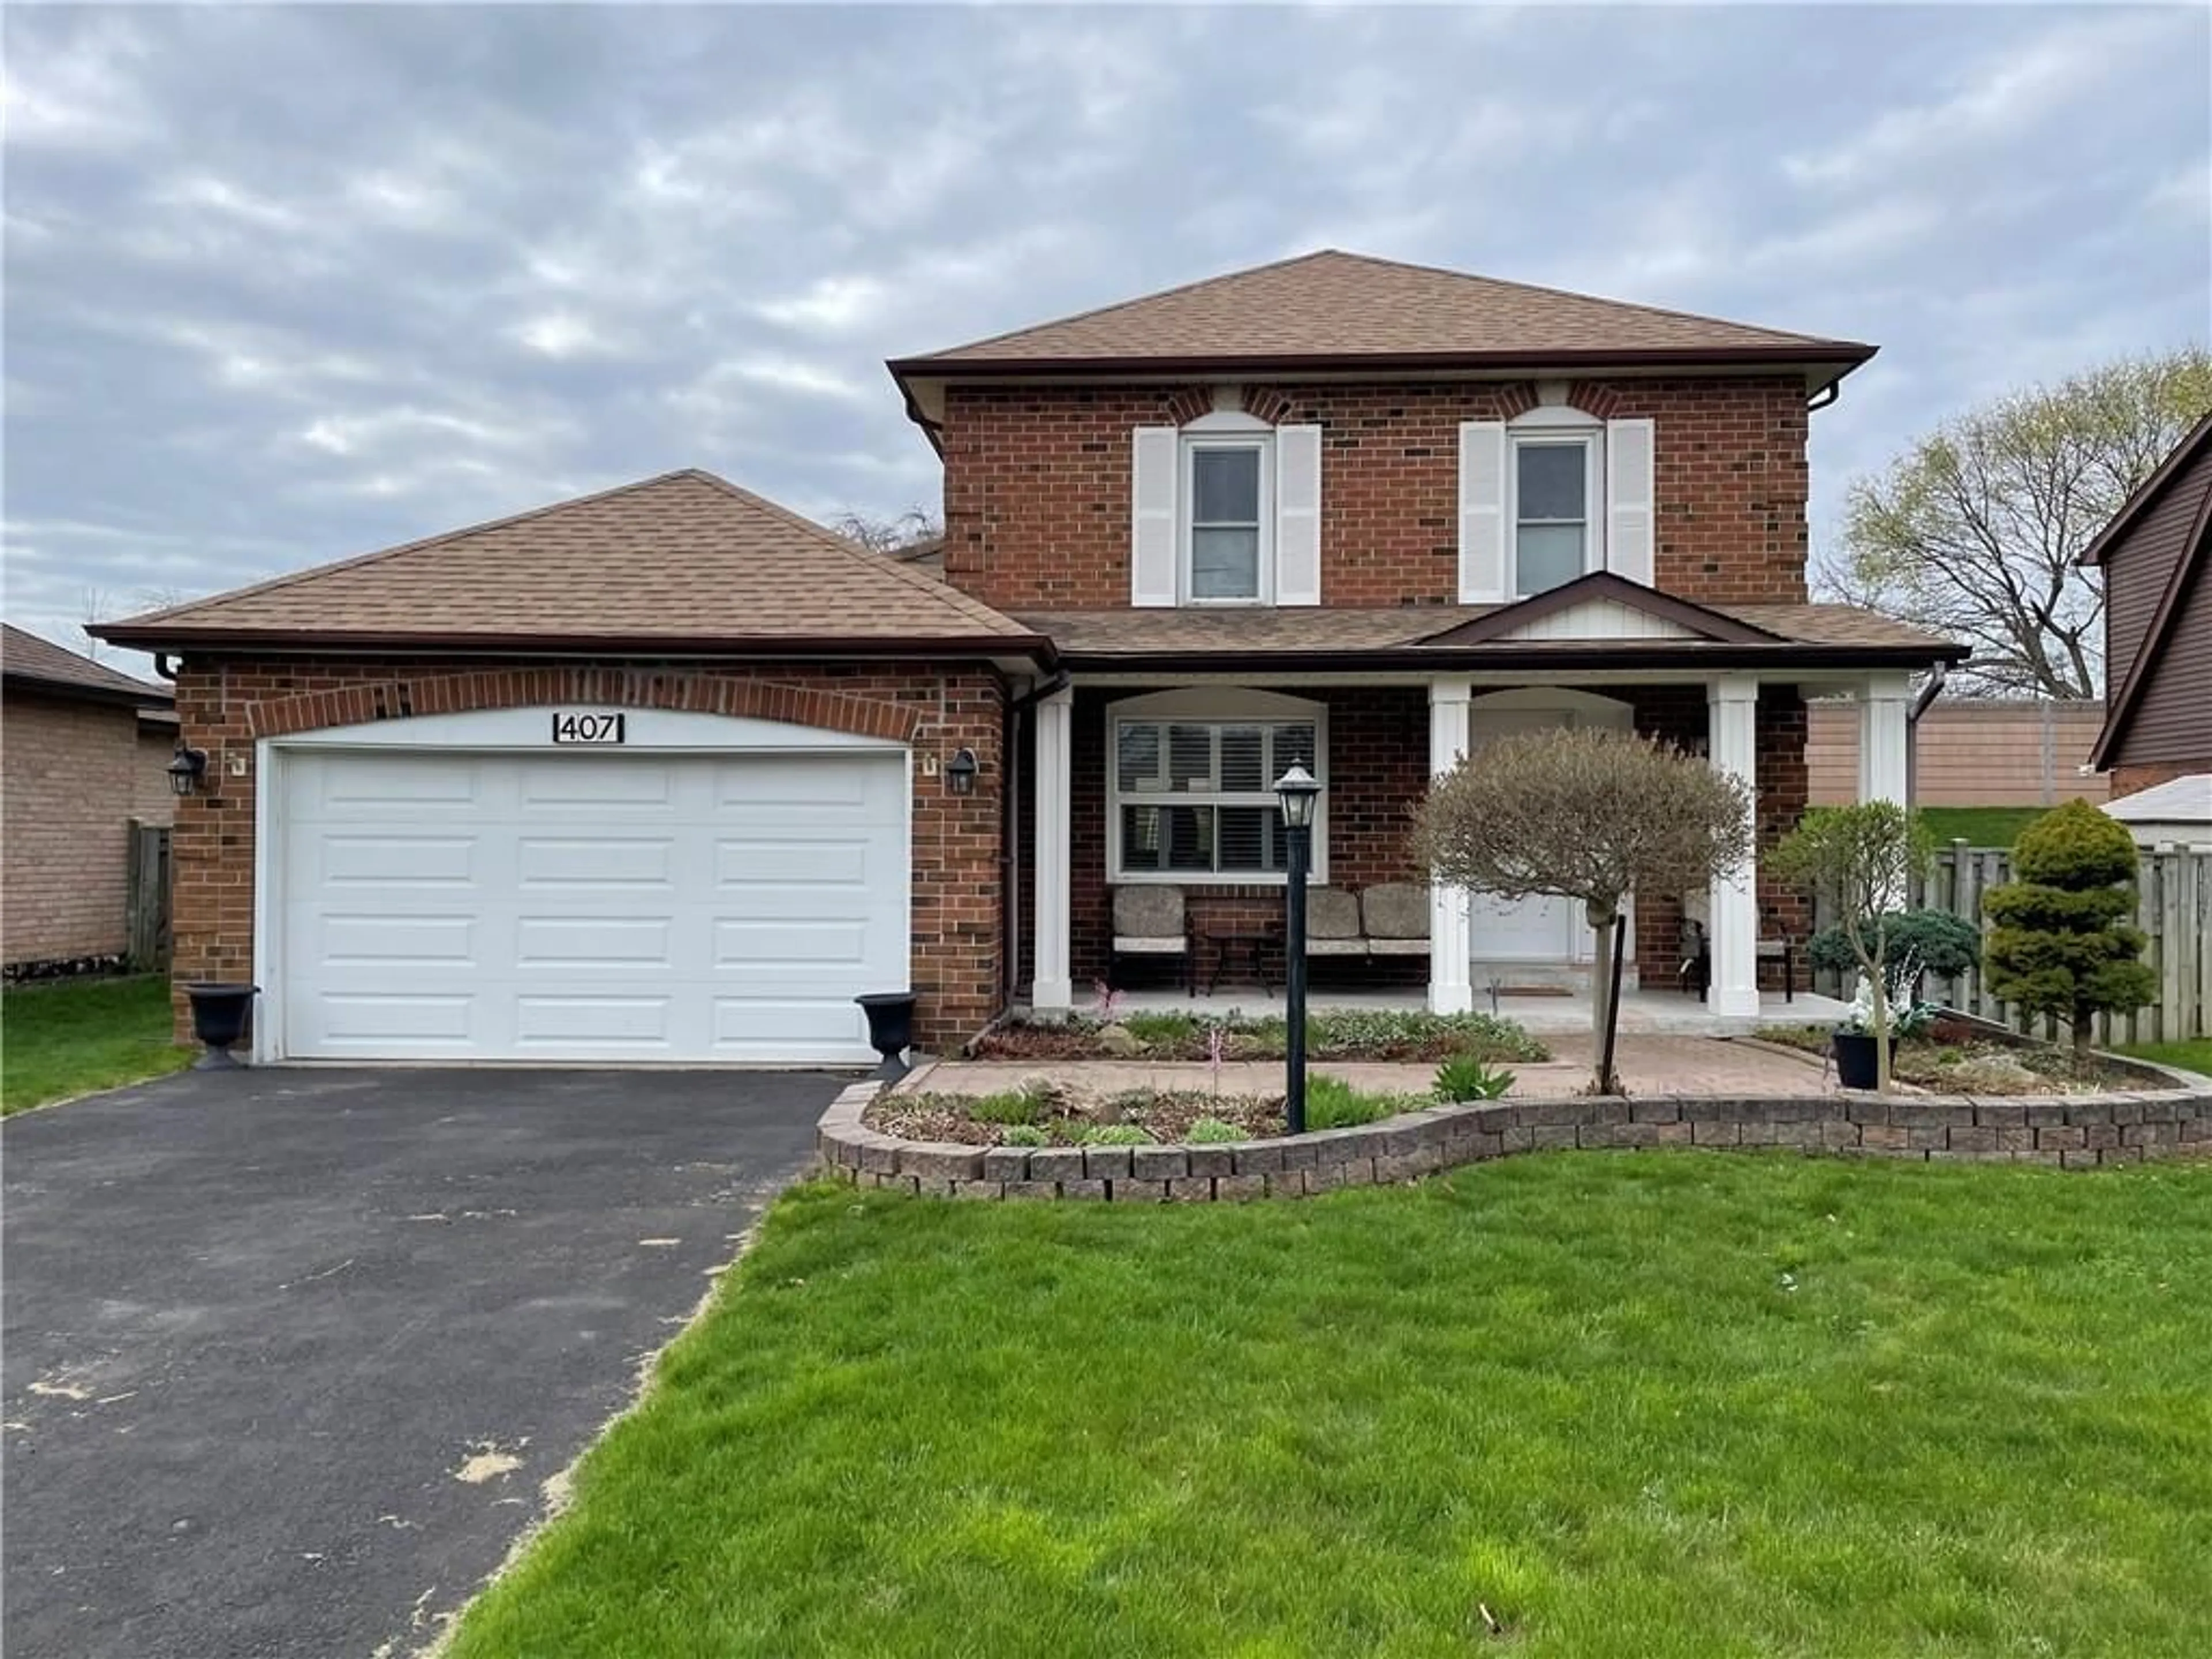 Home with brick exterior material for 407 Melanie Cres, Ancaster Ontario L9G 4B1